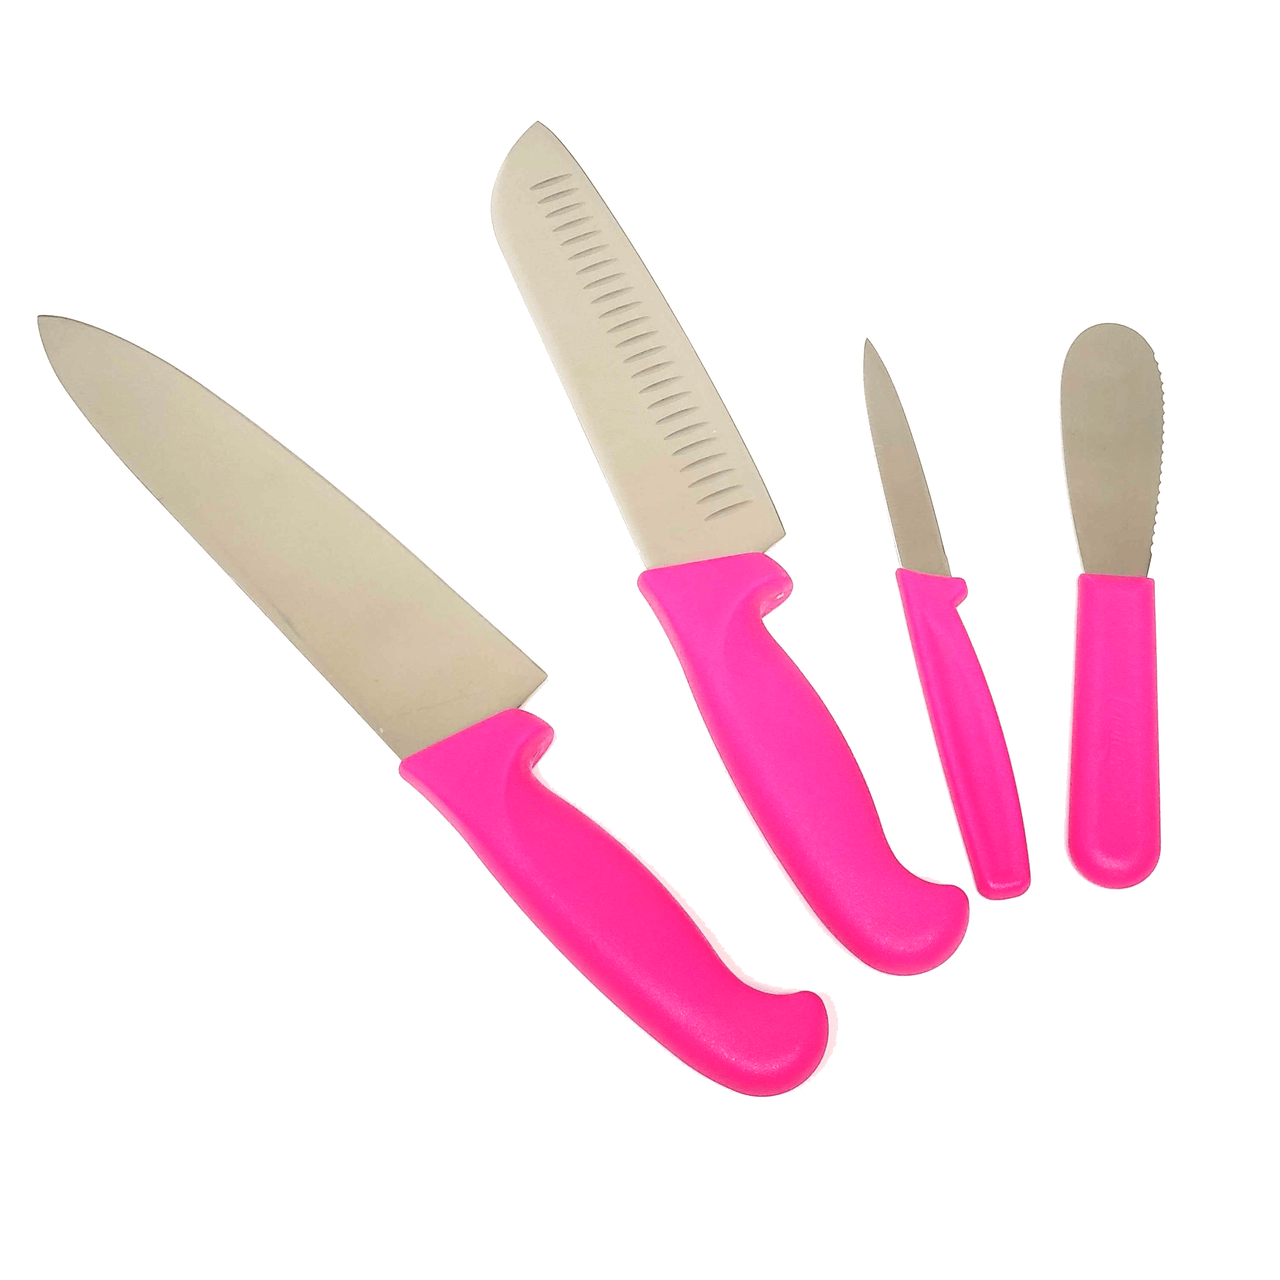 Cucina Chef Pro 4-Piece Knife Set with Neon Pink Handles